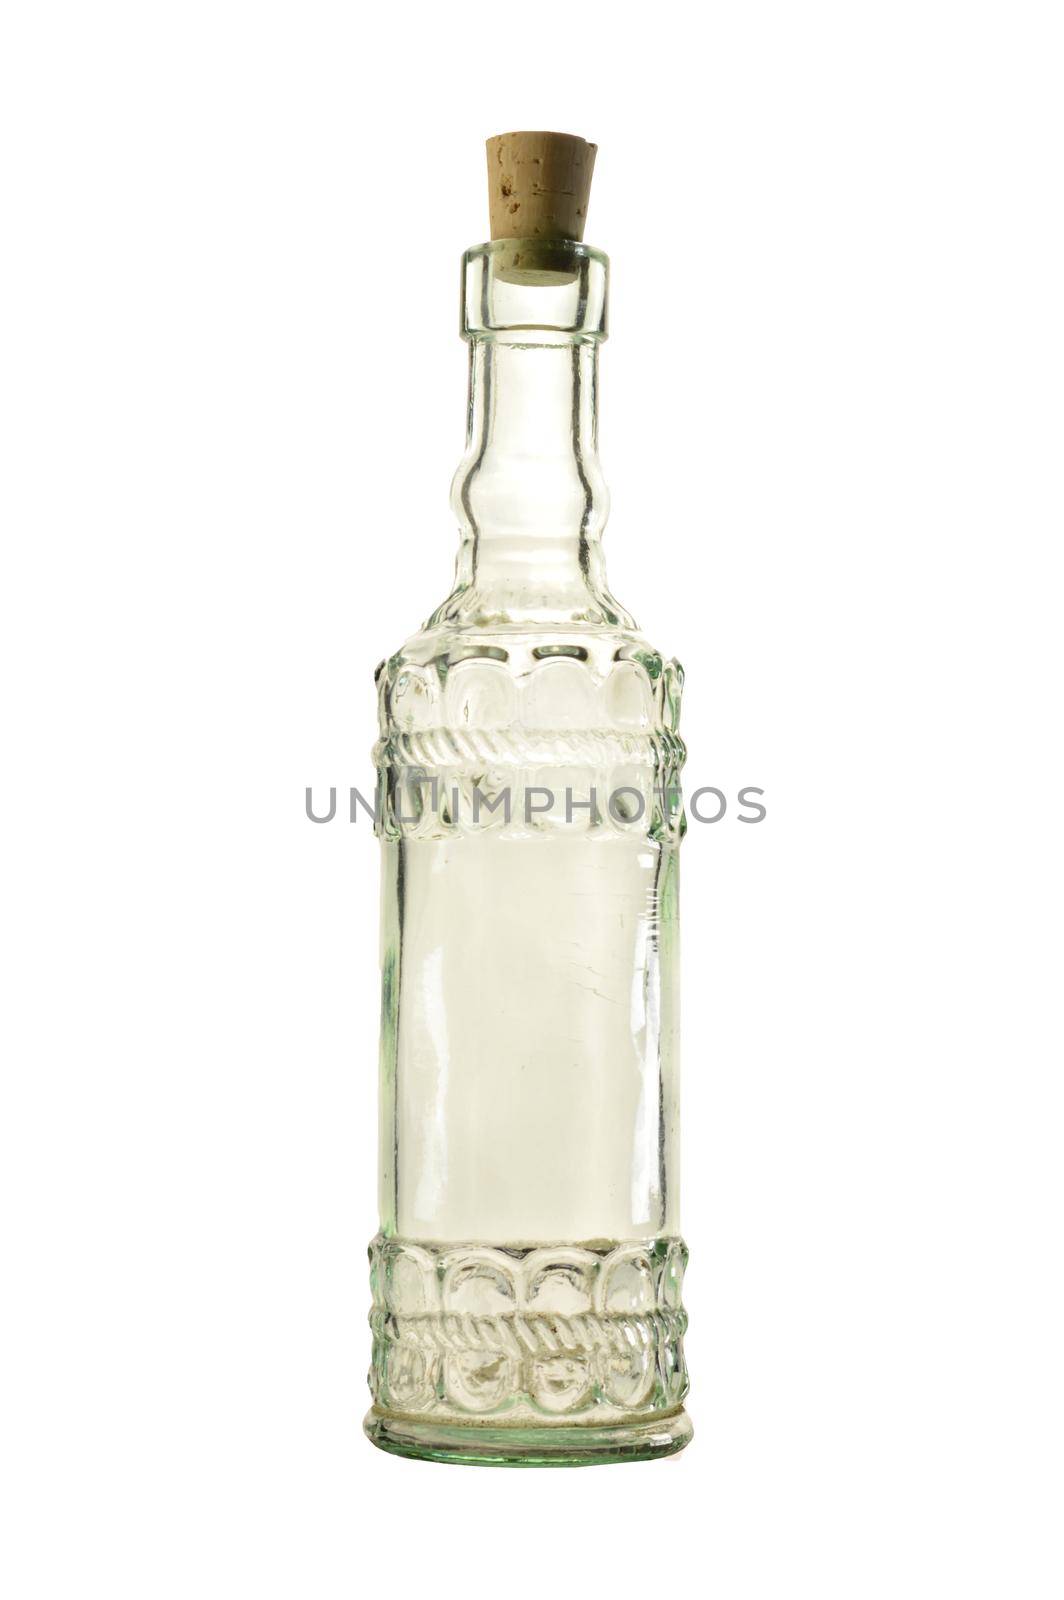 An isolated over white image of a unique glass bottle with a cork.